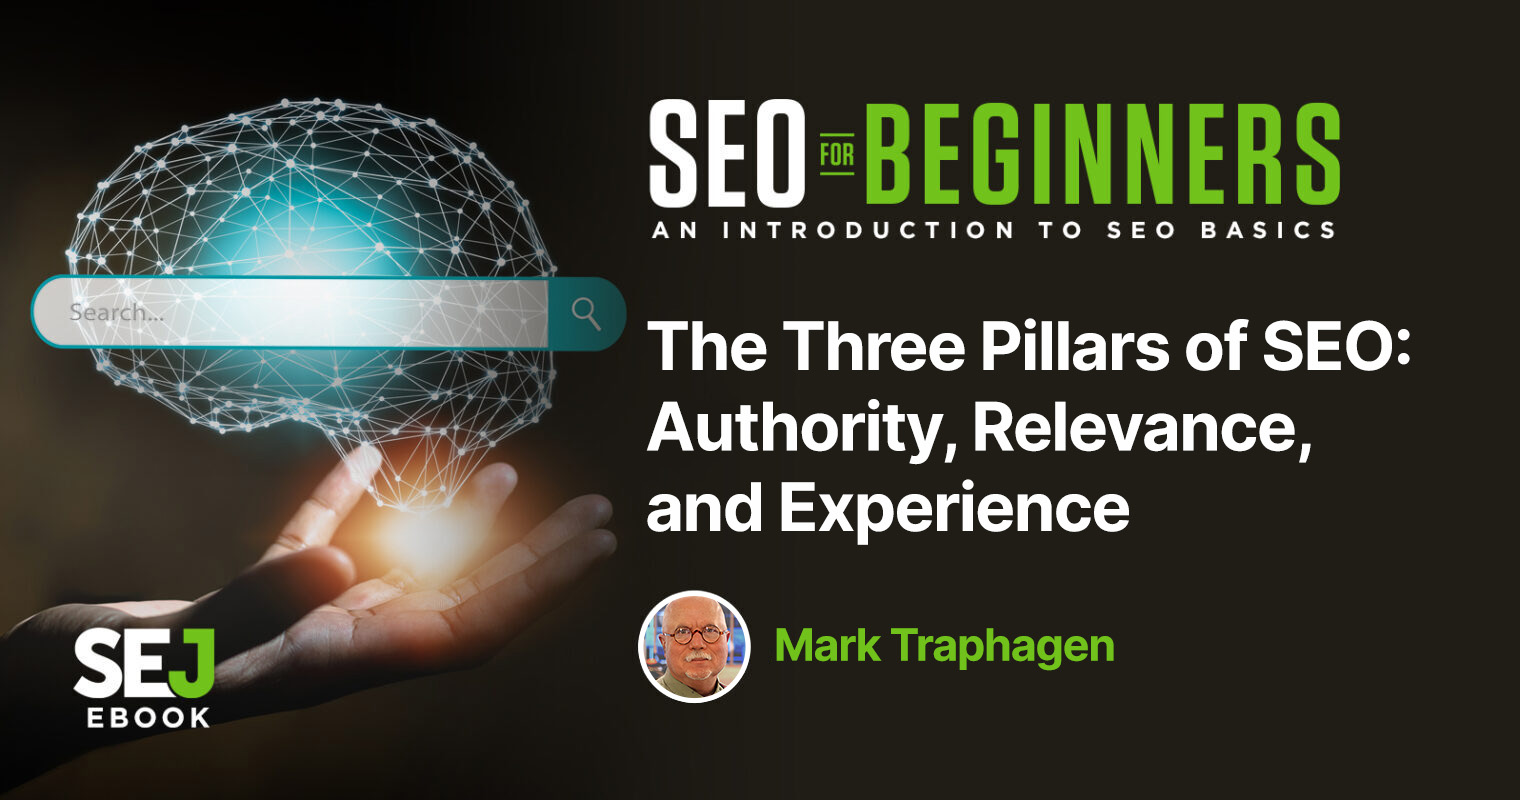 The Three Pillars Of SEO: Authority, Relevance, And Experience